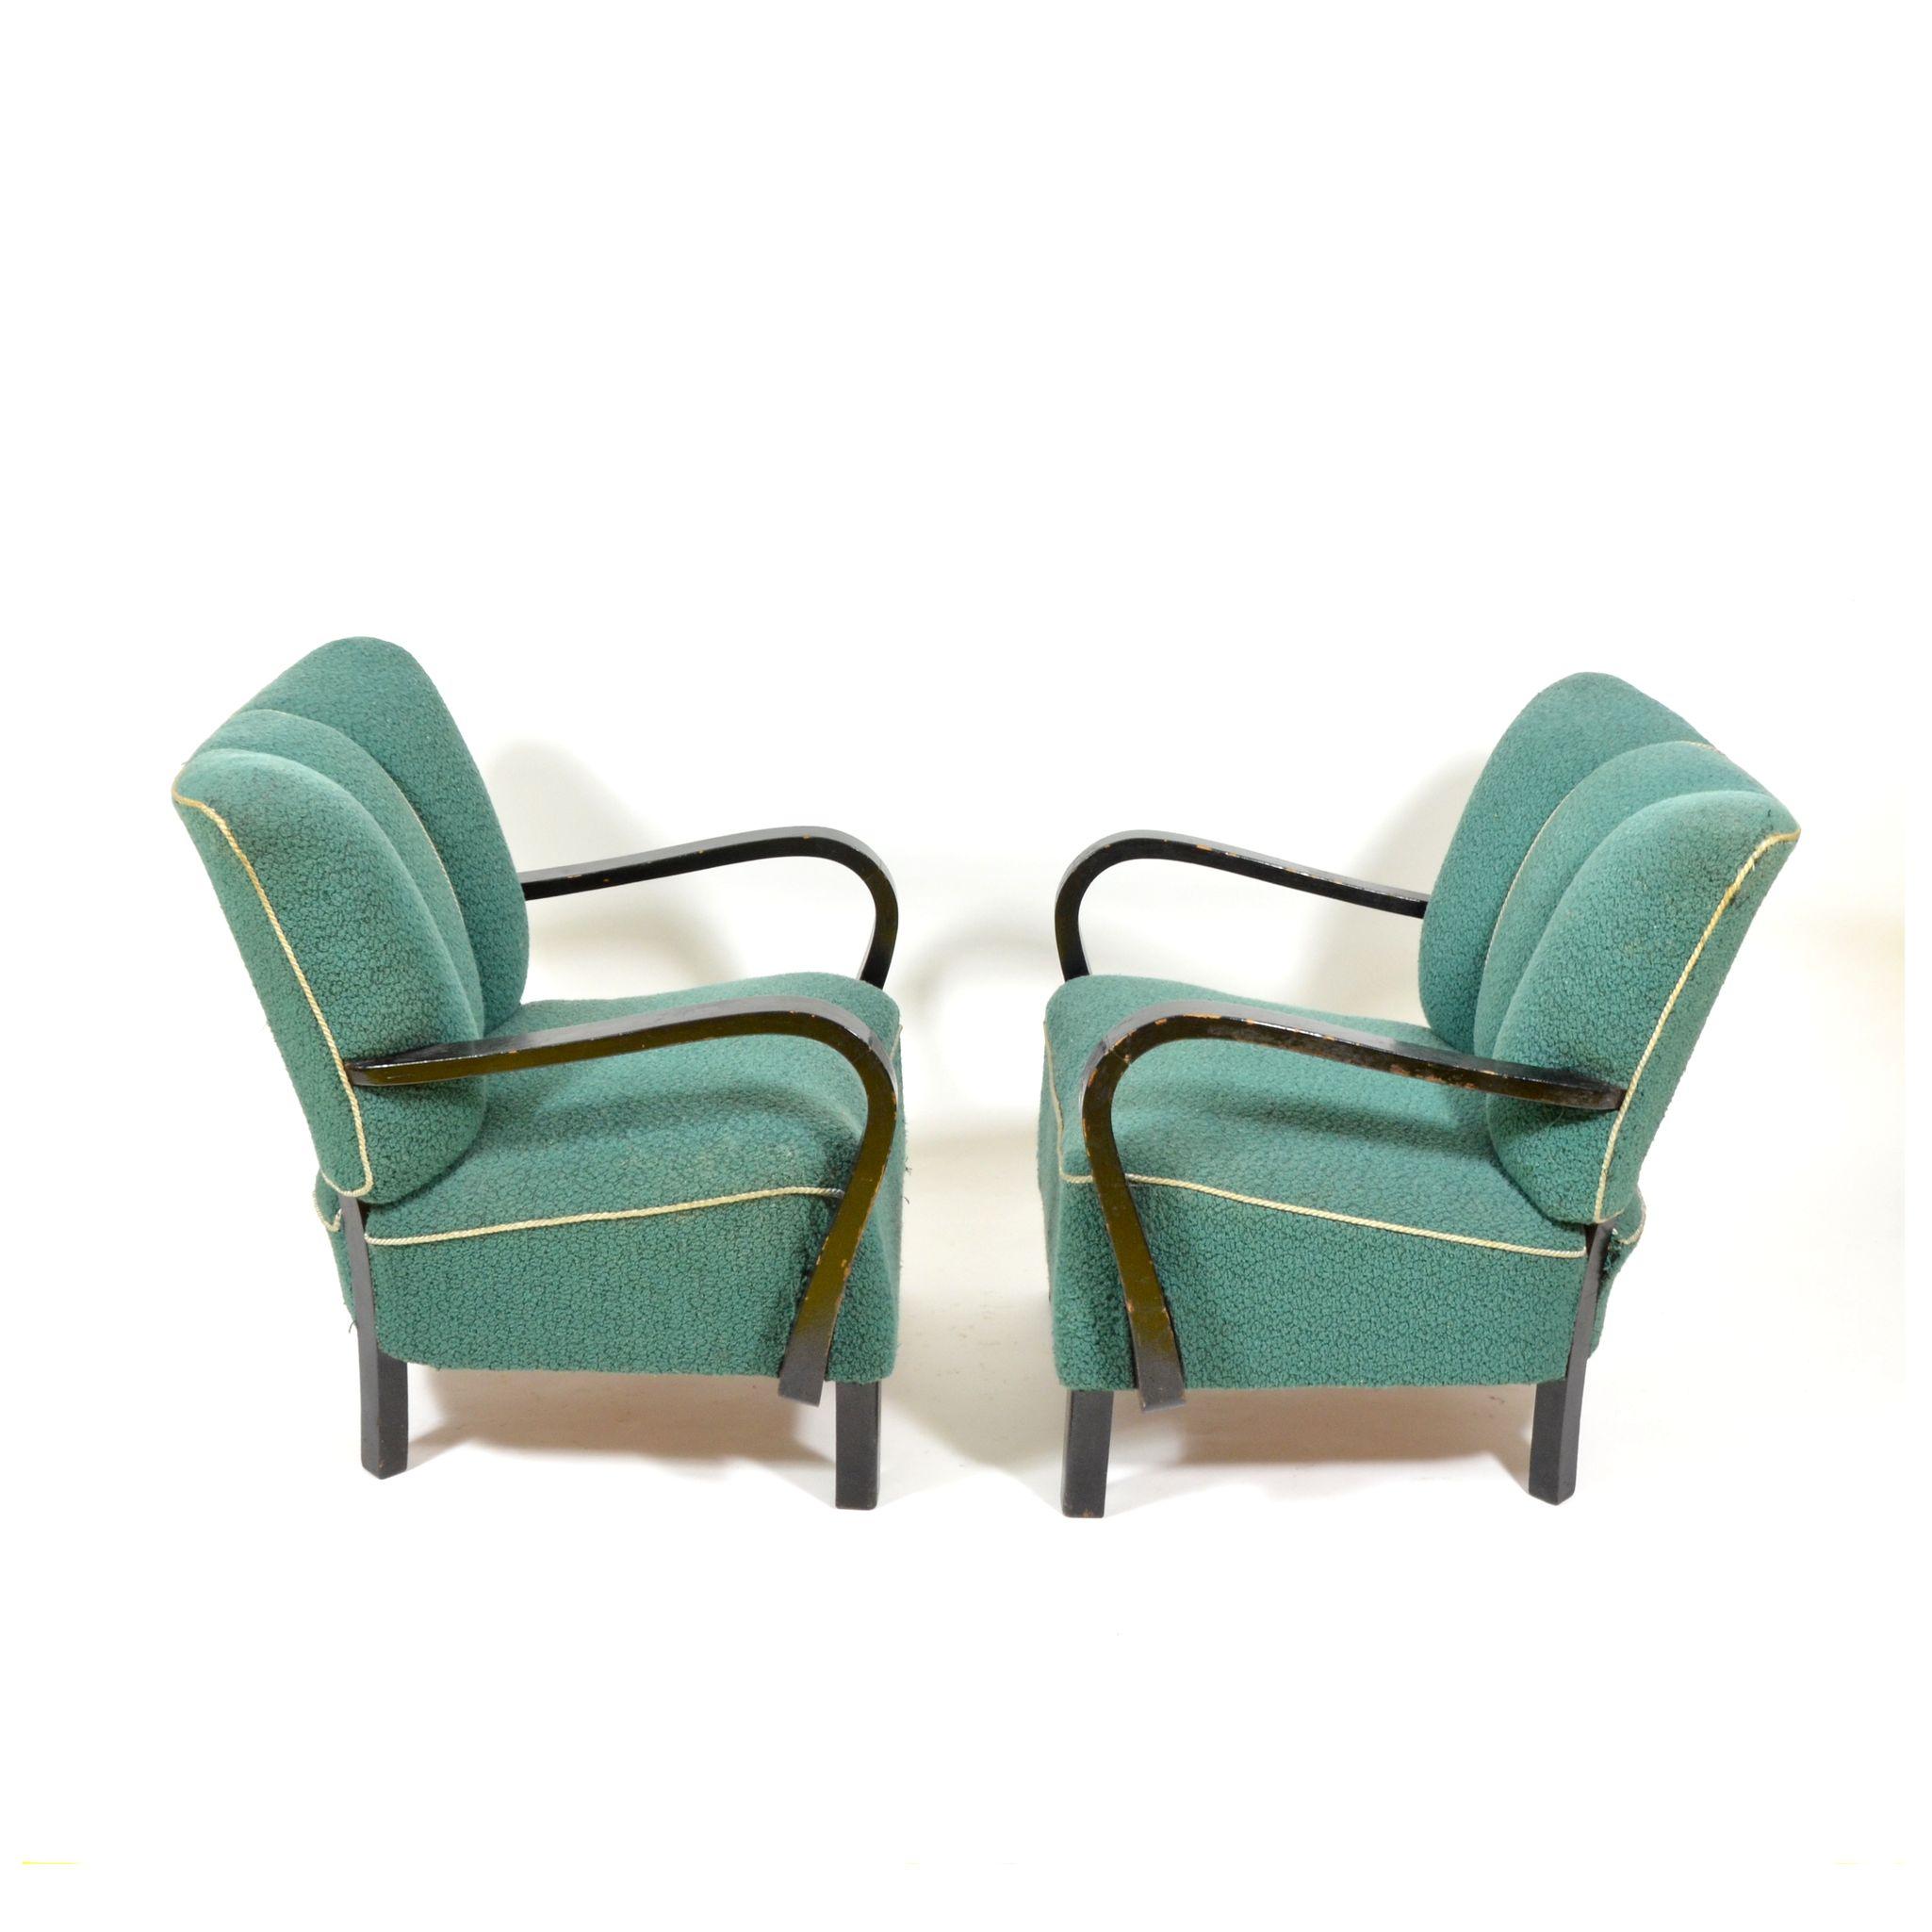 Pair of Original Armchairs with Wooden Armrests, Czechoslovakia, 1940s For Sale 1